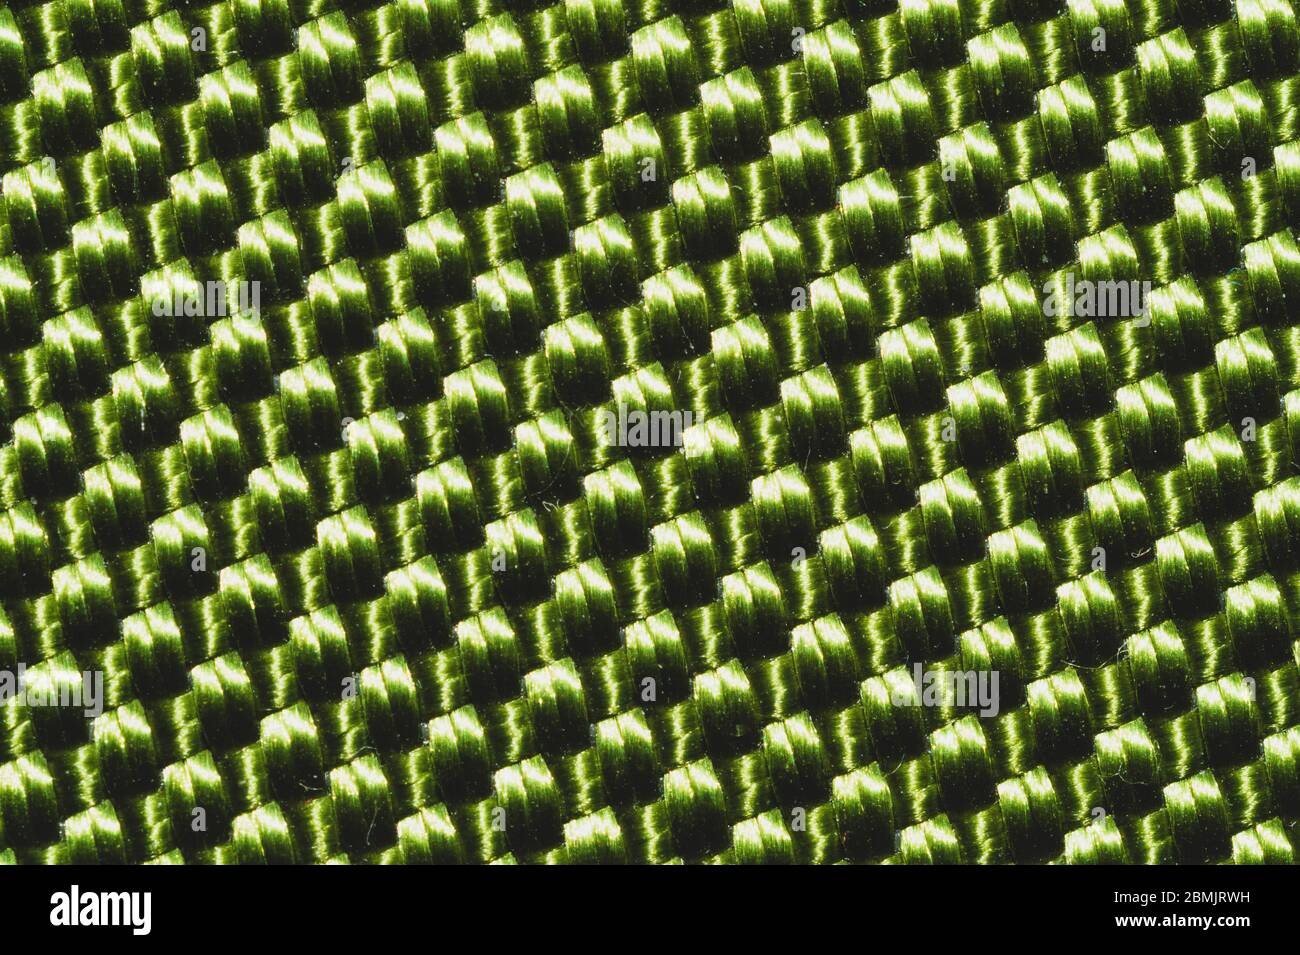 Synthetic fabric texture close up. green braided surface. woven background. stitches of fibers Stock Photo